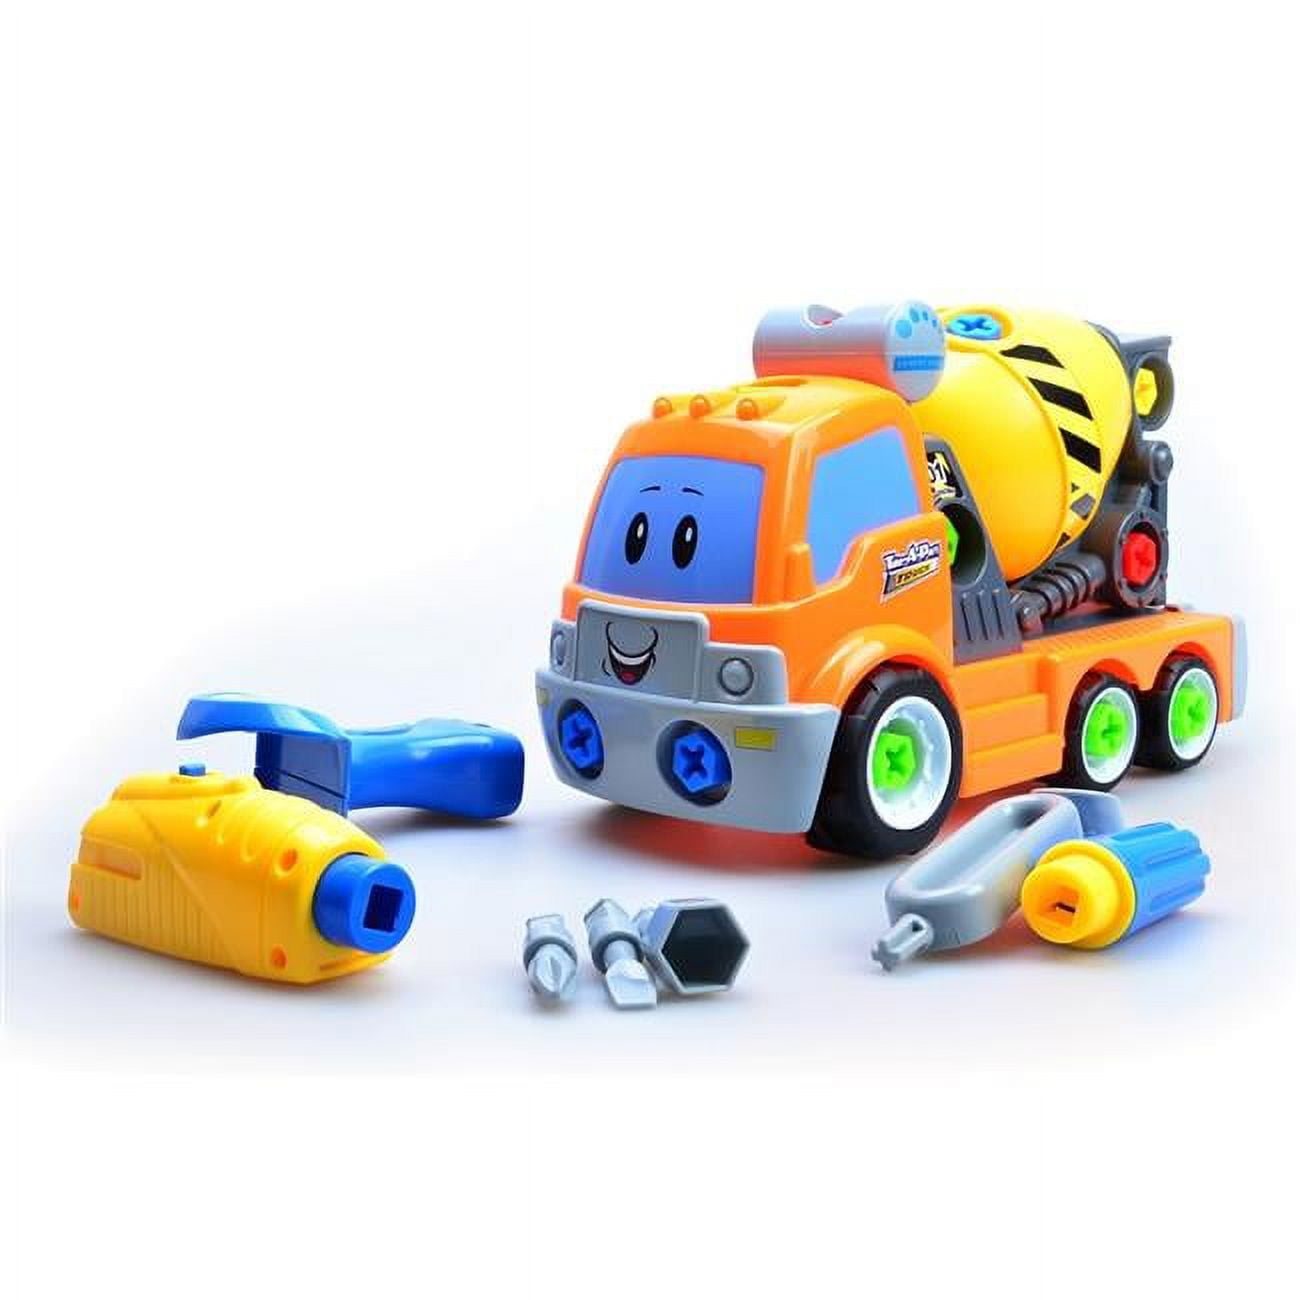 Ps22911 Take Apart Build Your Own Cement Mixer Truck